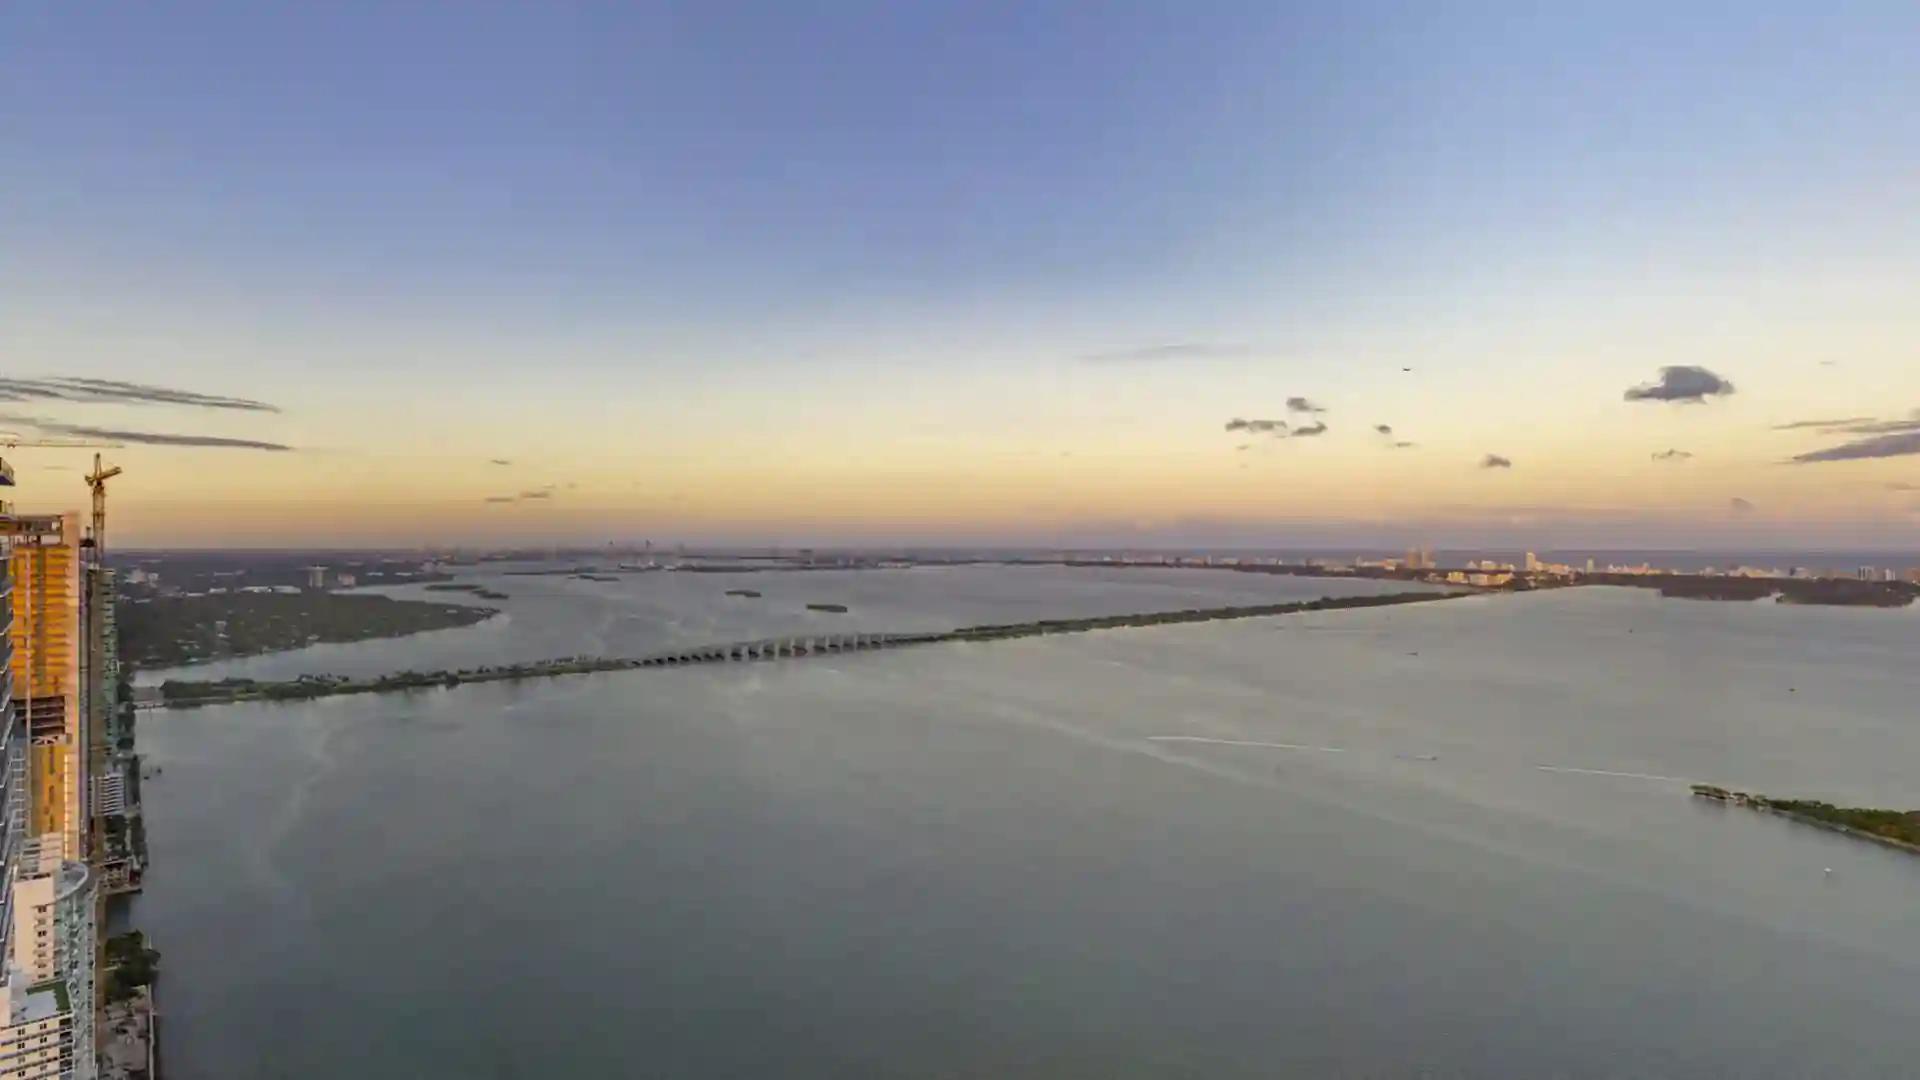 Amazing aerial view of the bridge connecting two islands with awesome weather